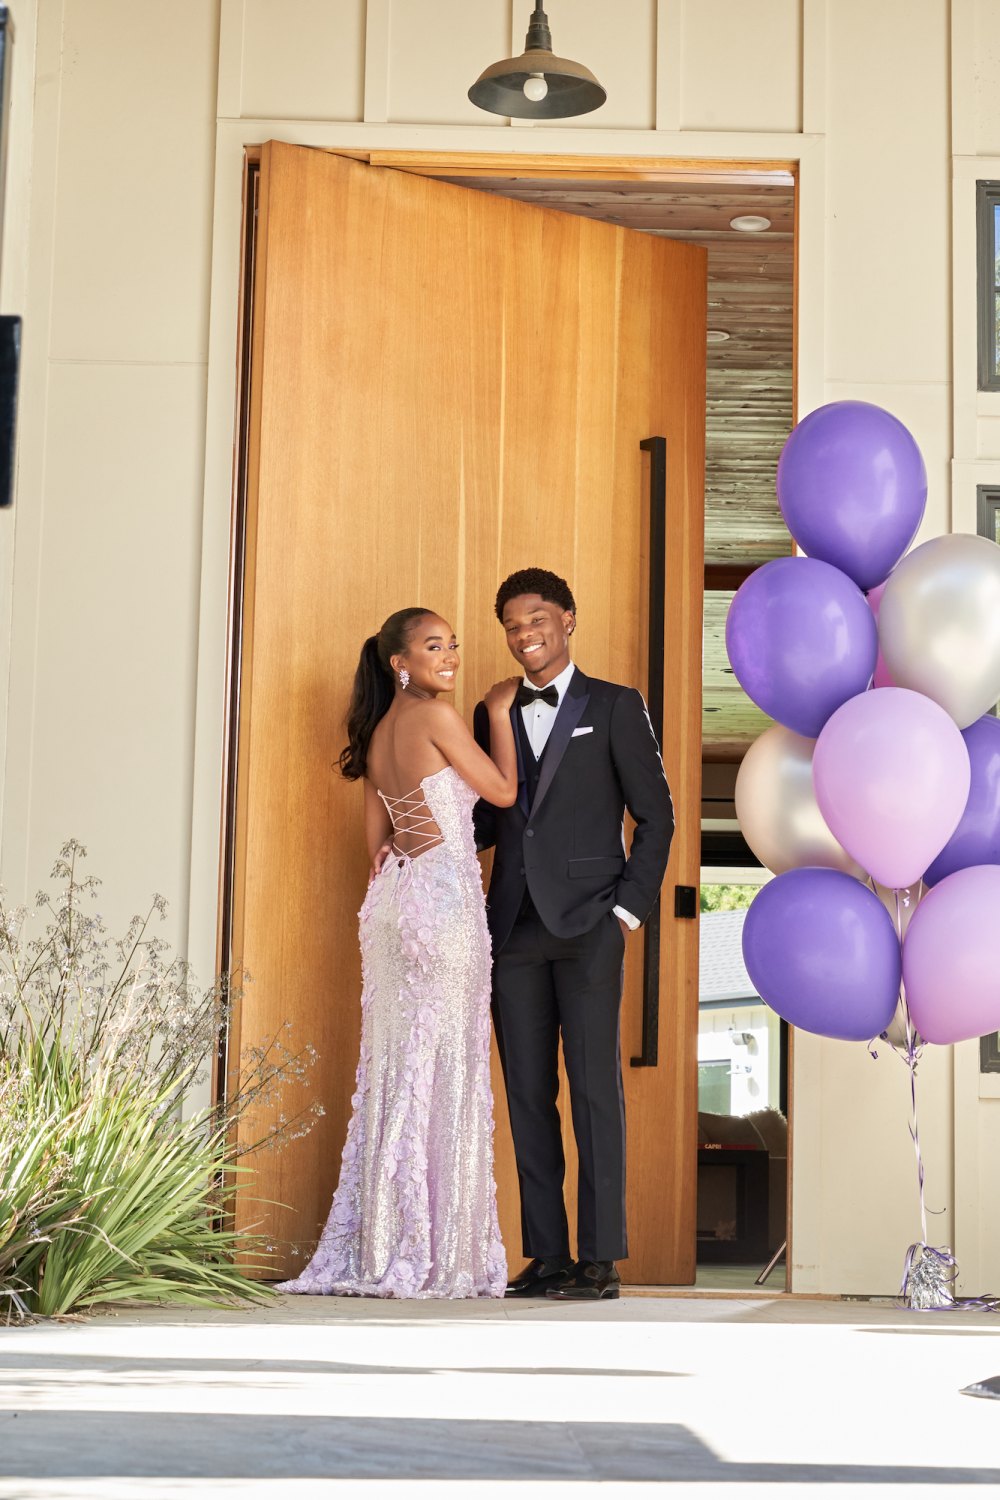 Diddy s Daughter Chance Takes Chloe and Halle Bailey s Brother Branson as Her Prom Date